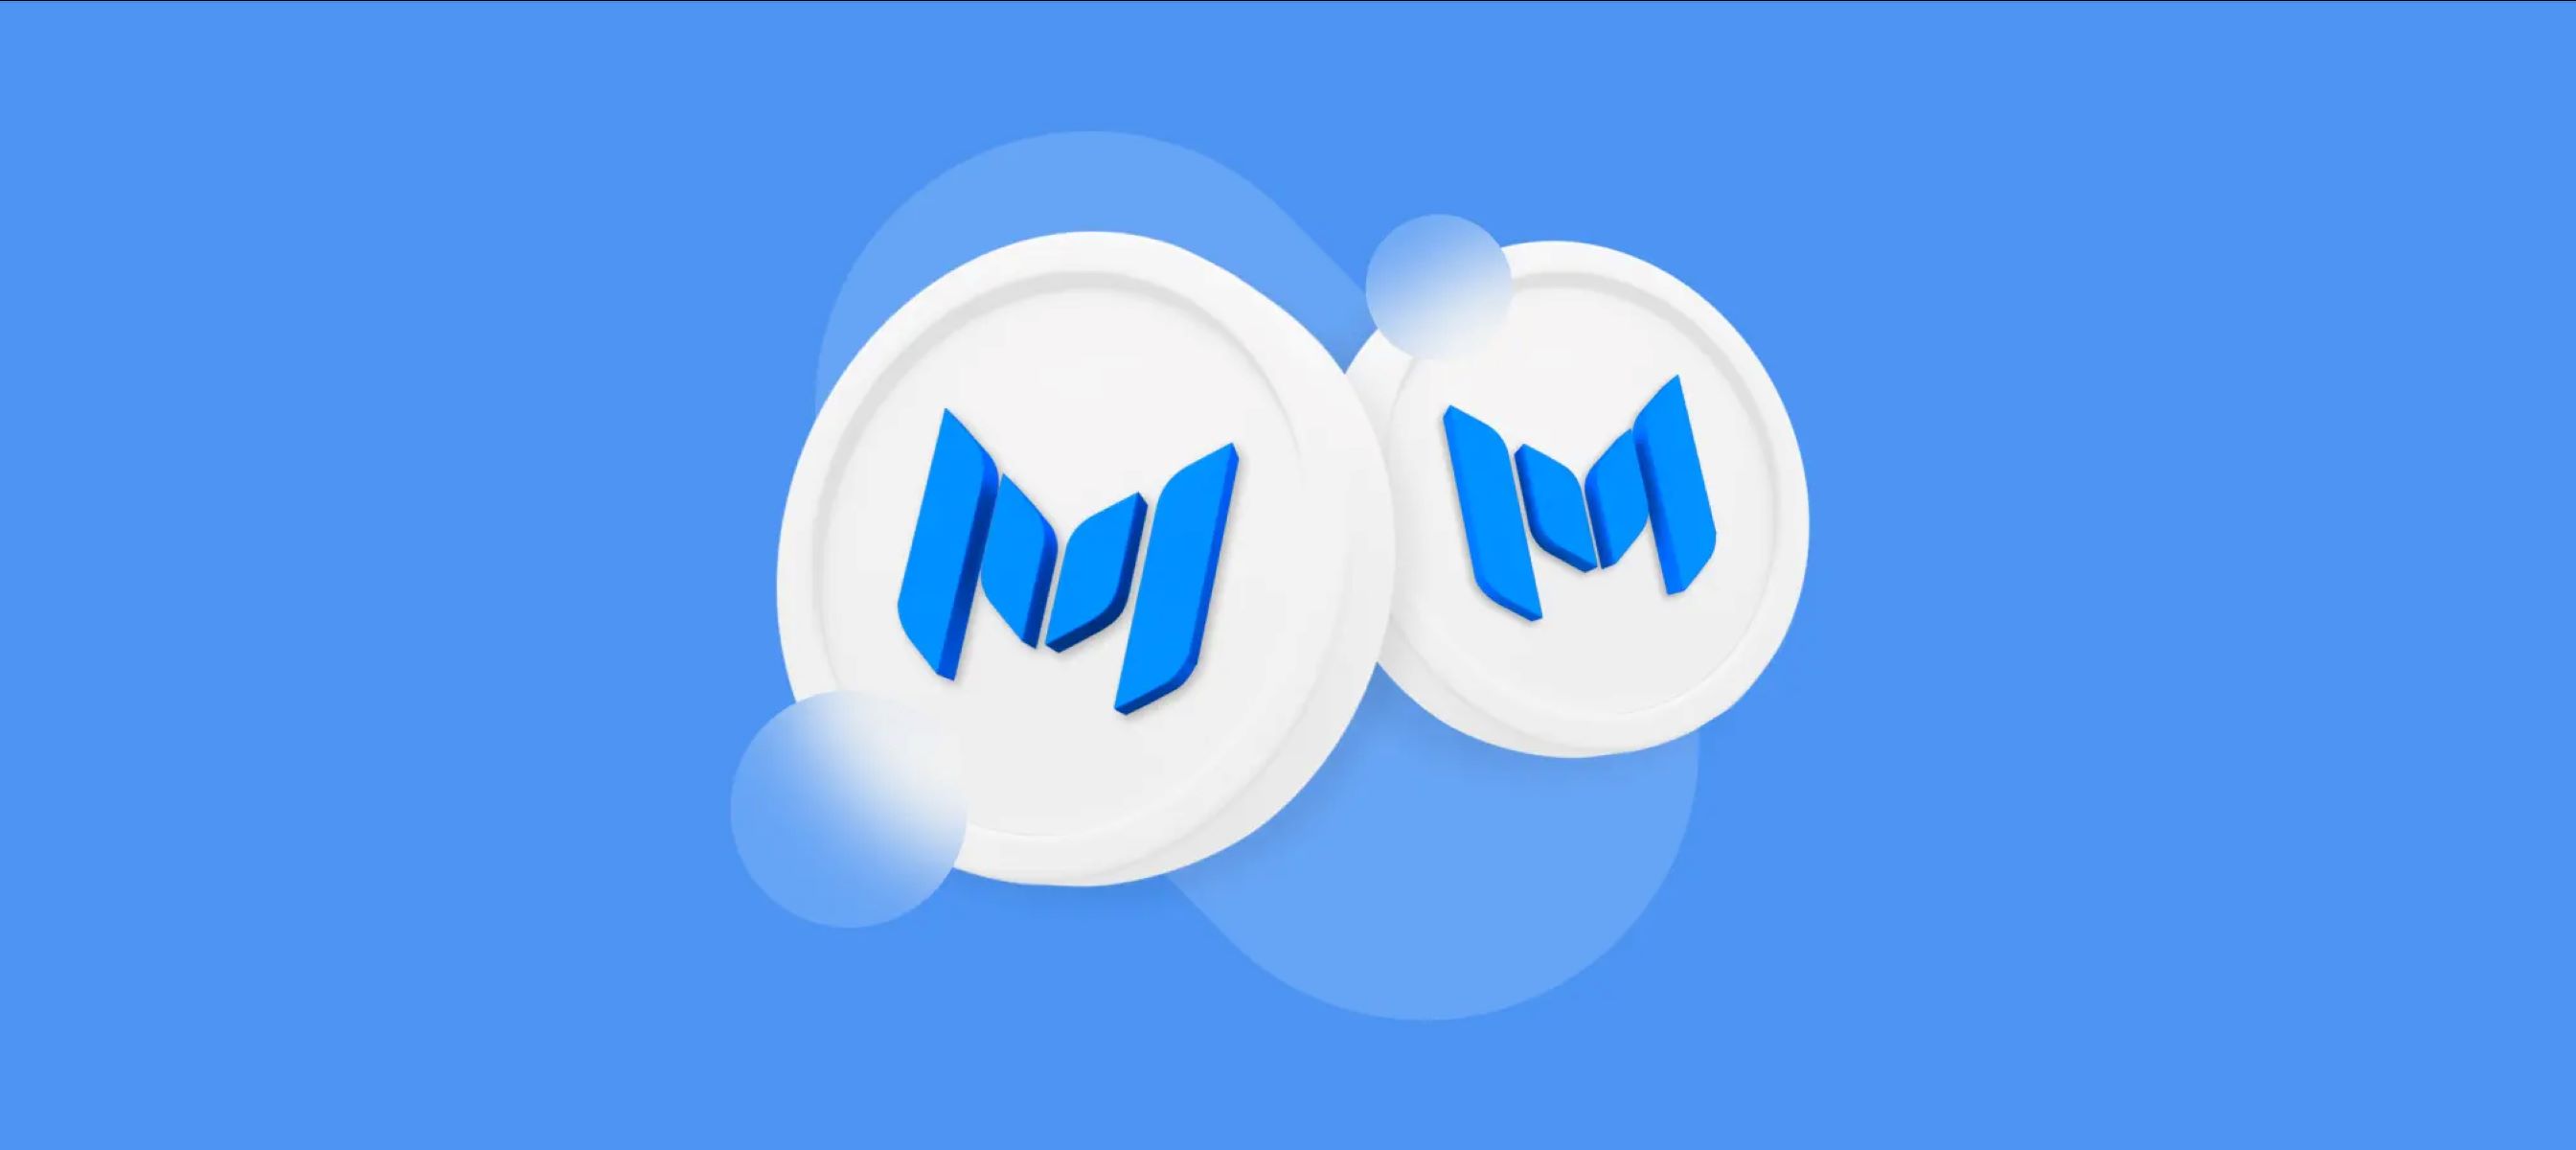 11-surprising-facts-about-monetha-mth